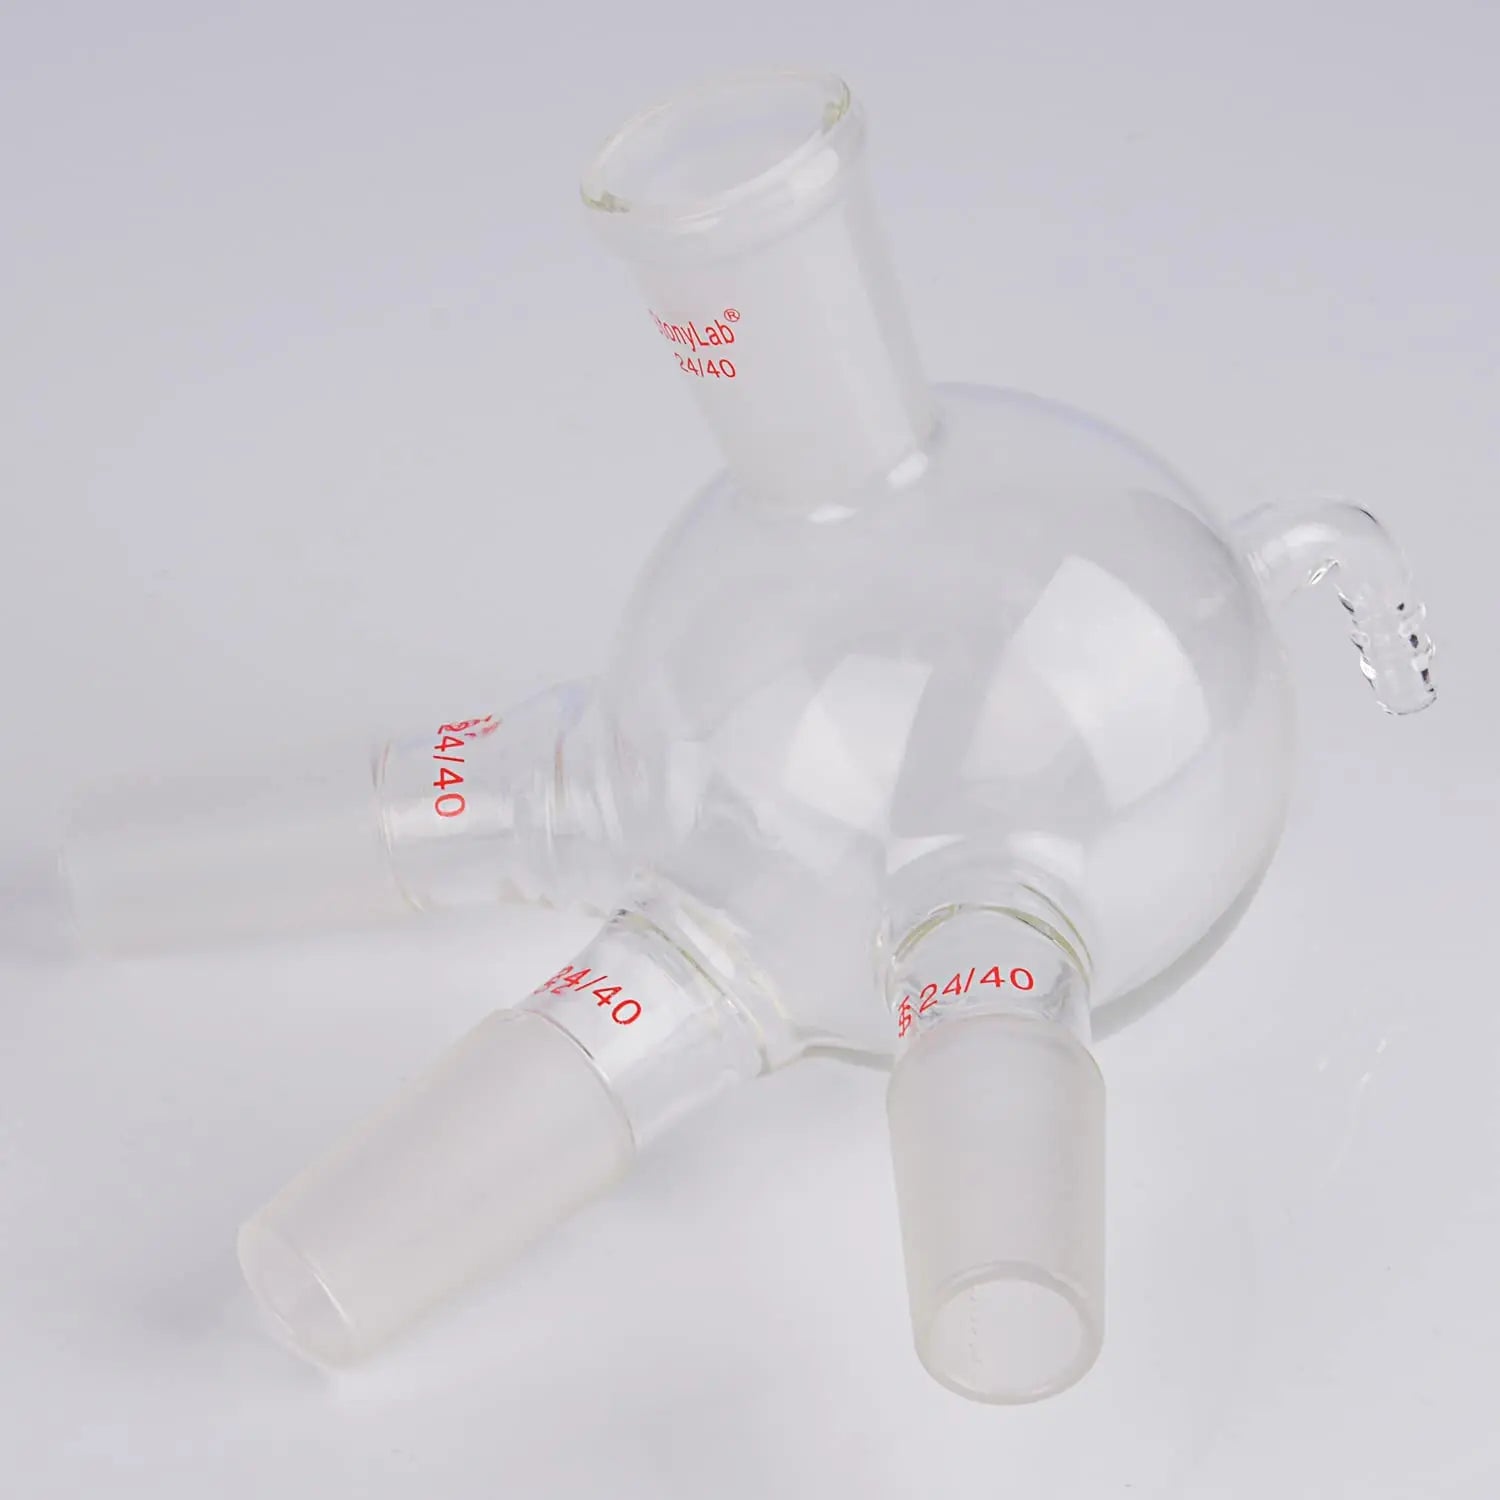 Glass Distilling Receiver, Distillation Adapter with Four 24/40 Joints, and Hose Connection Adapters - Distilling